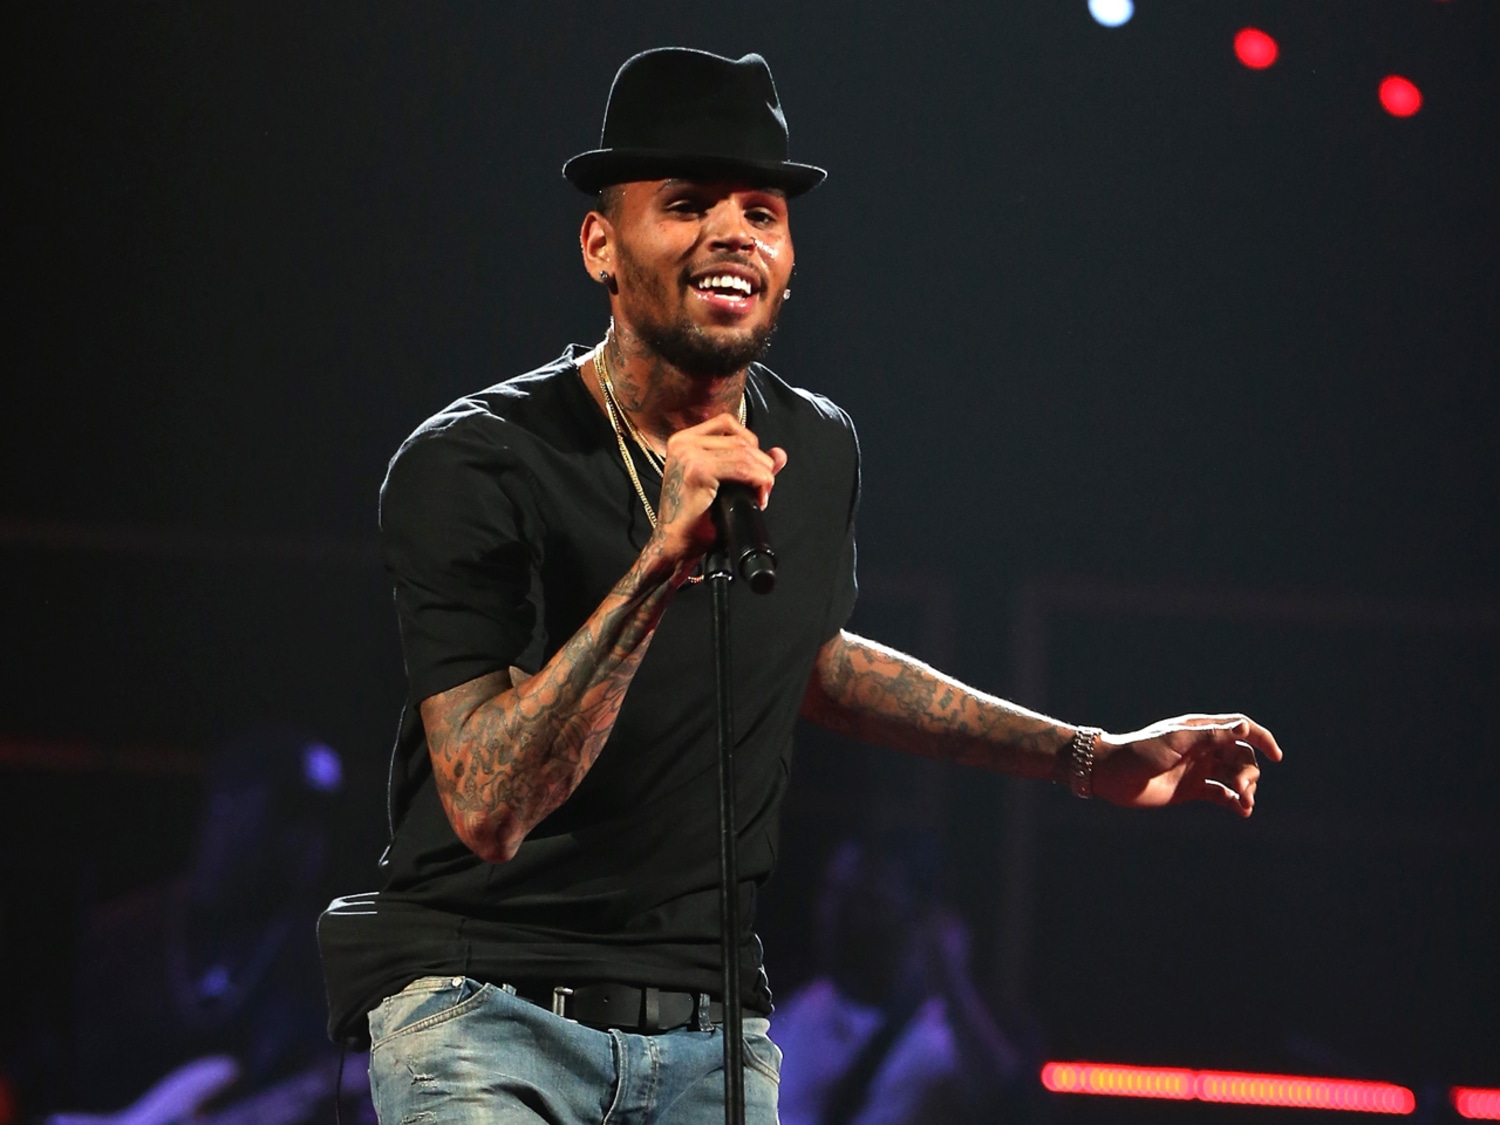 Chris Brown says he lost his virginity at 8 years old